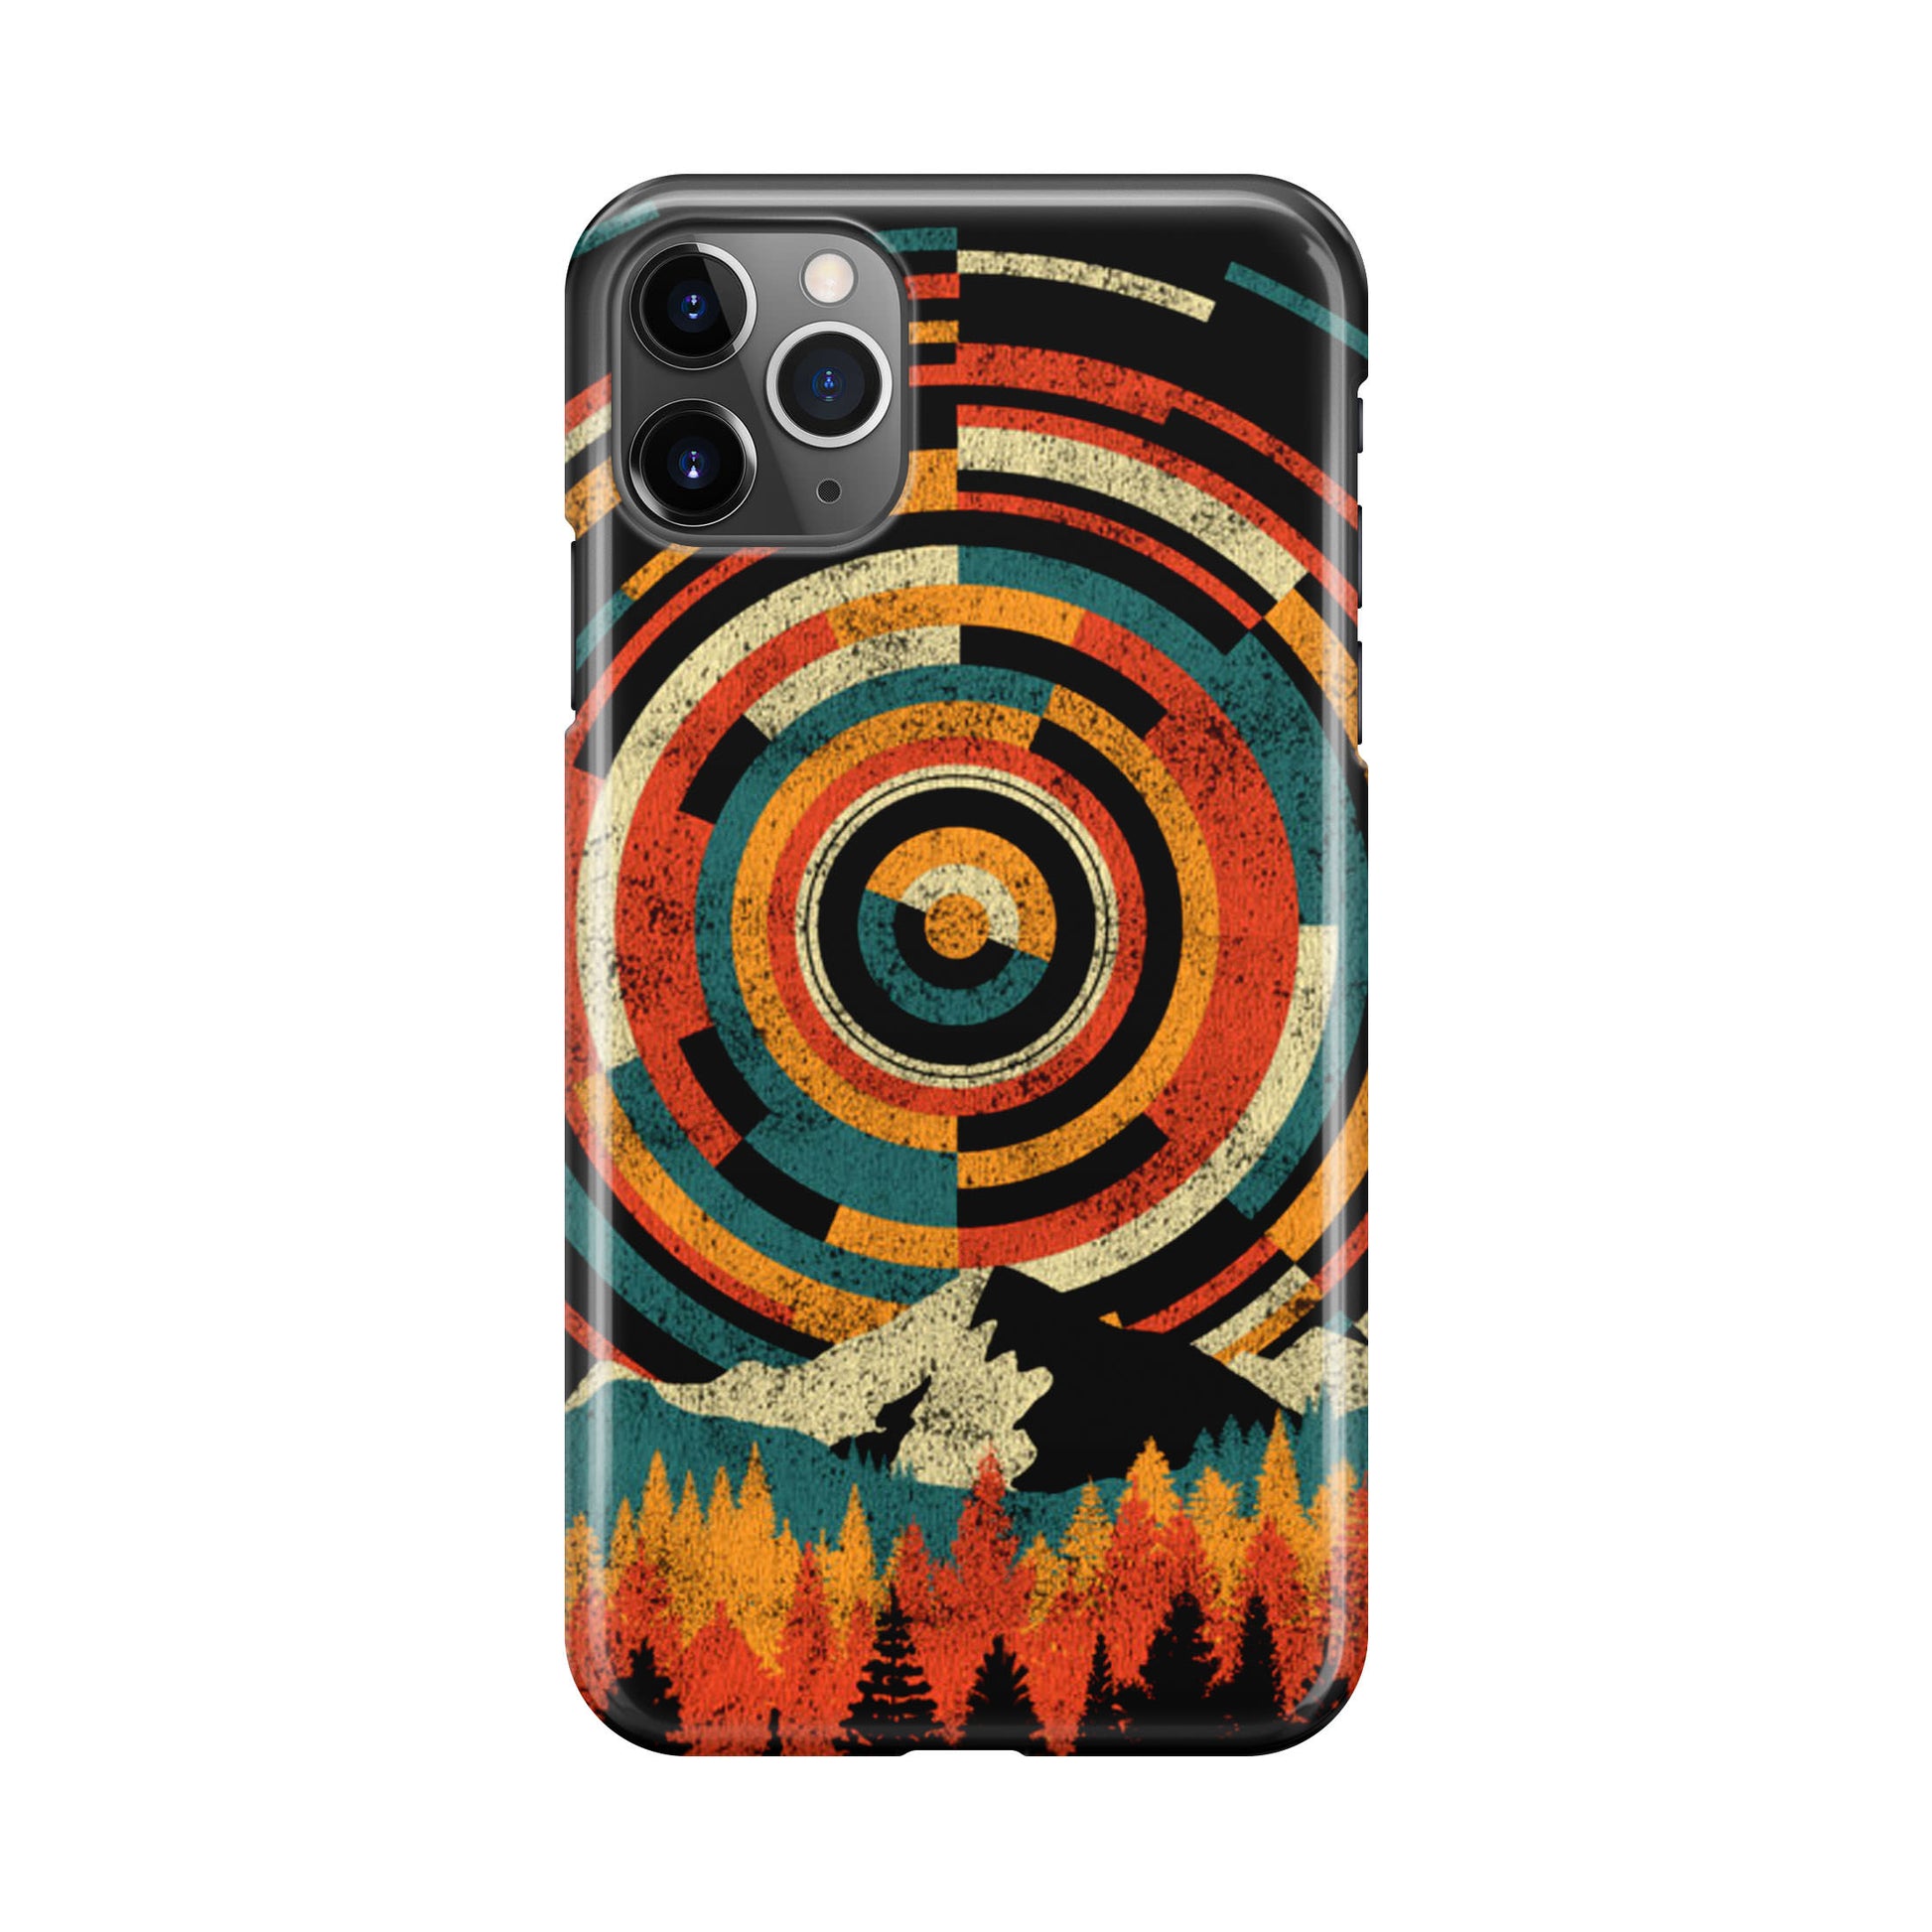 The Geometry Of Sunrise iPhone 11 Pro Max Case